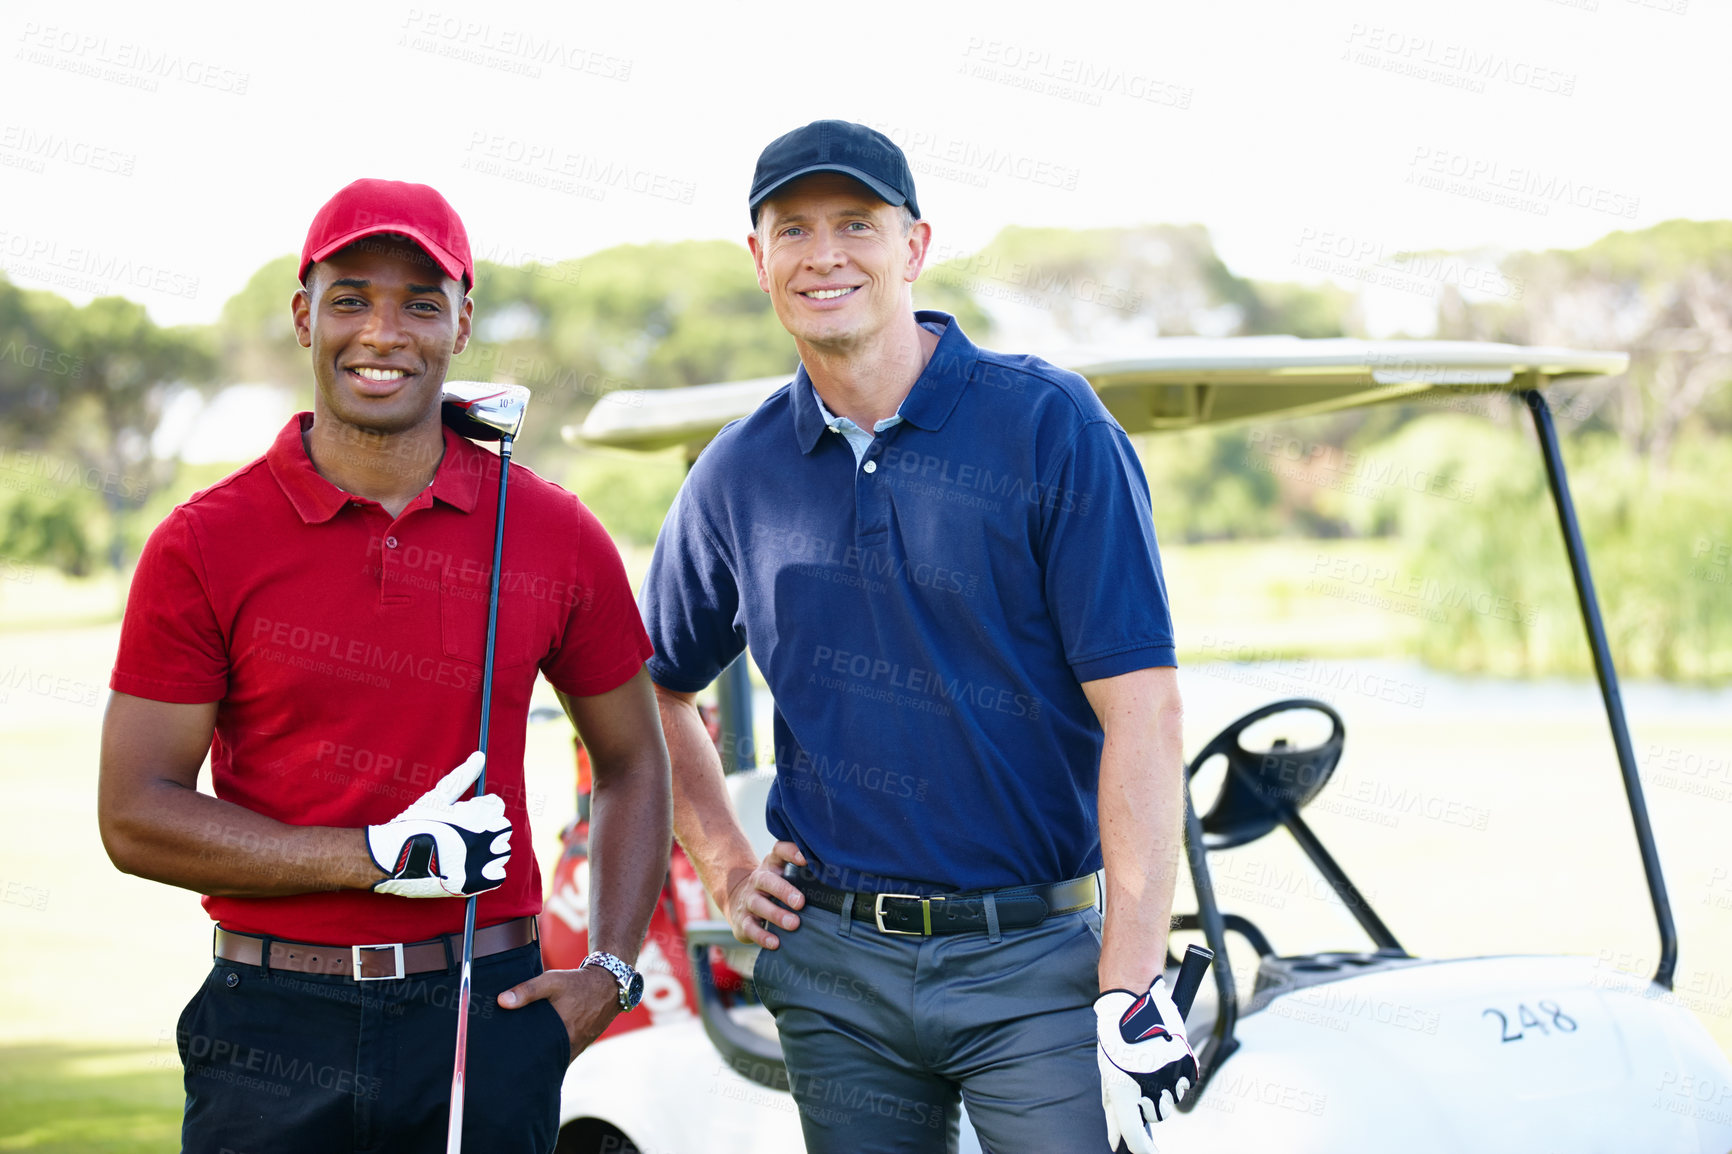 Buy stock photo Portrait, men and club on golf course with transport for training, happiness and collaboration. Male people, sports equipment and cart for activity with sportswear, teamwork and health outdoor